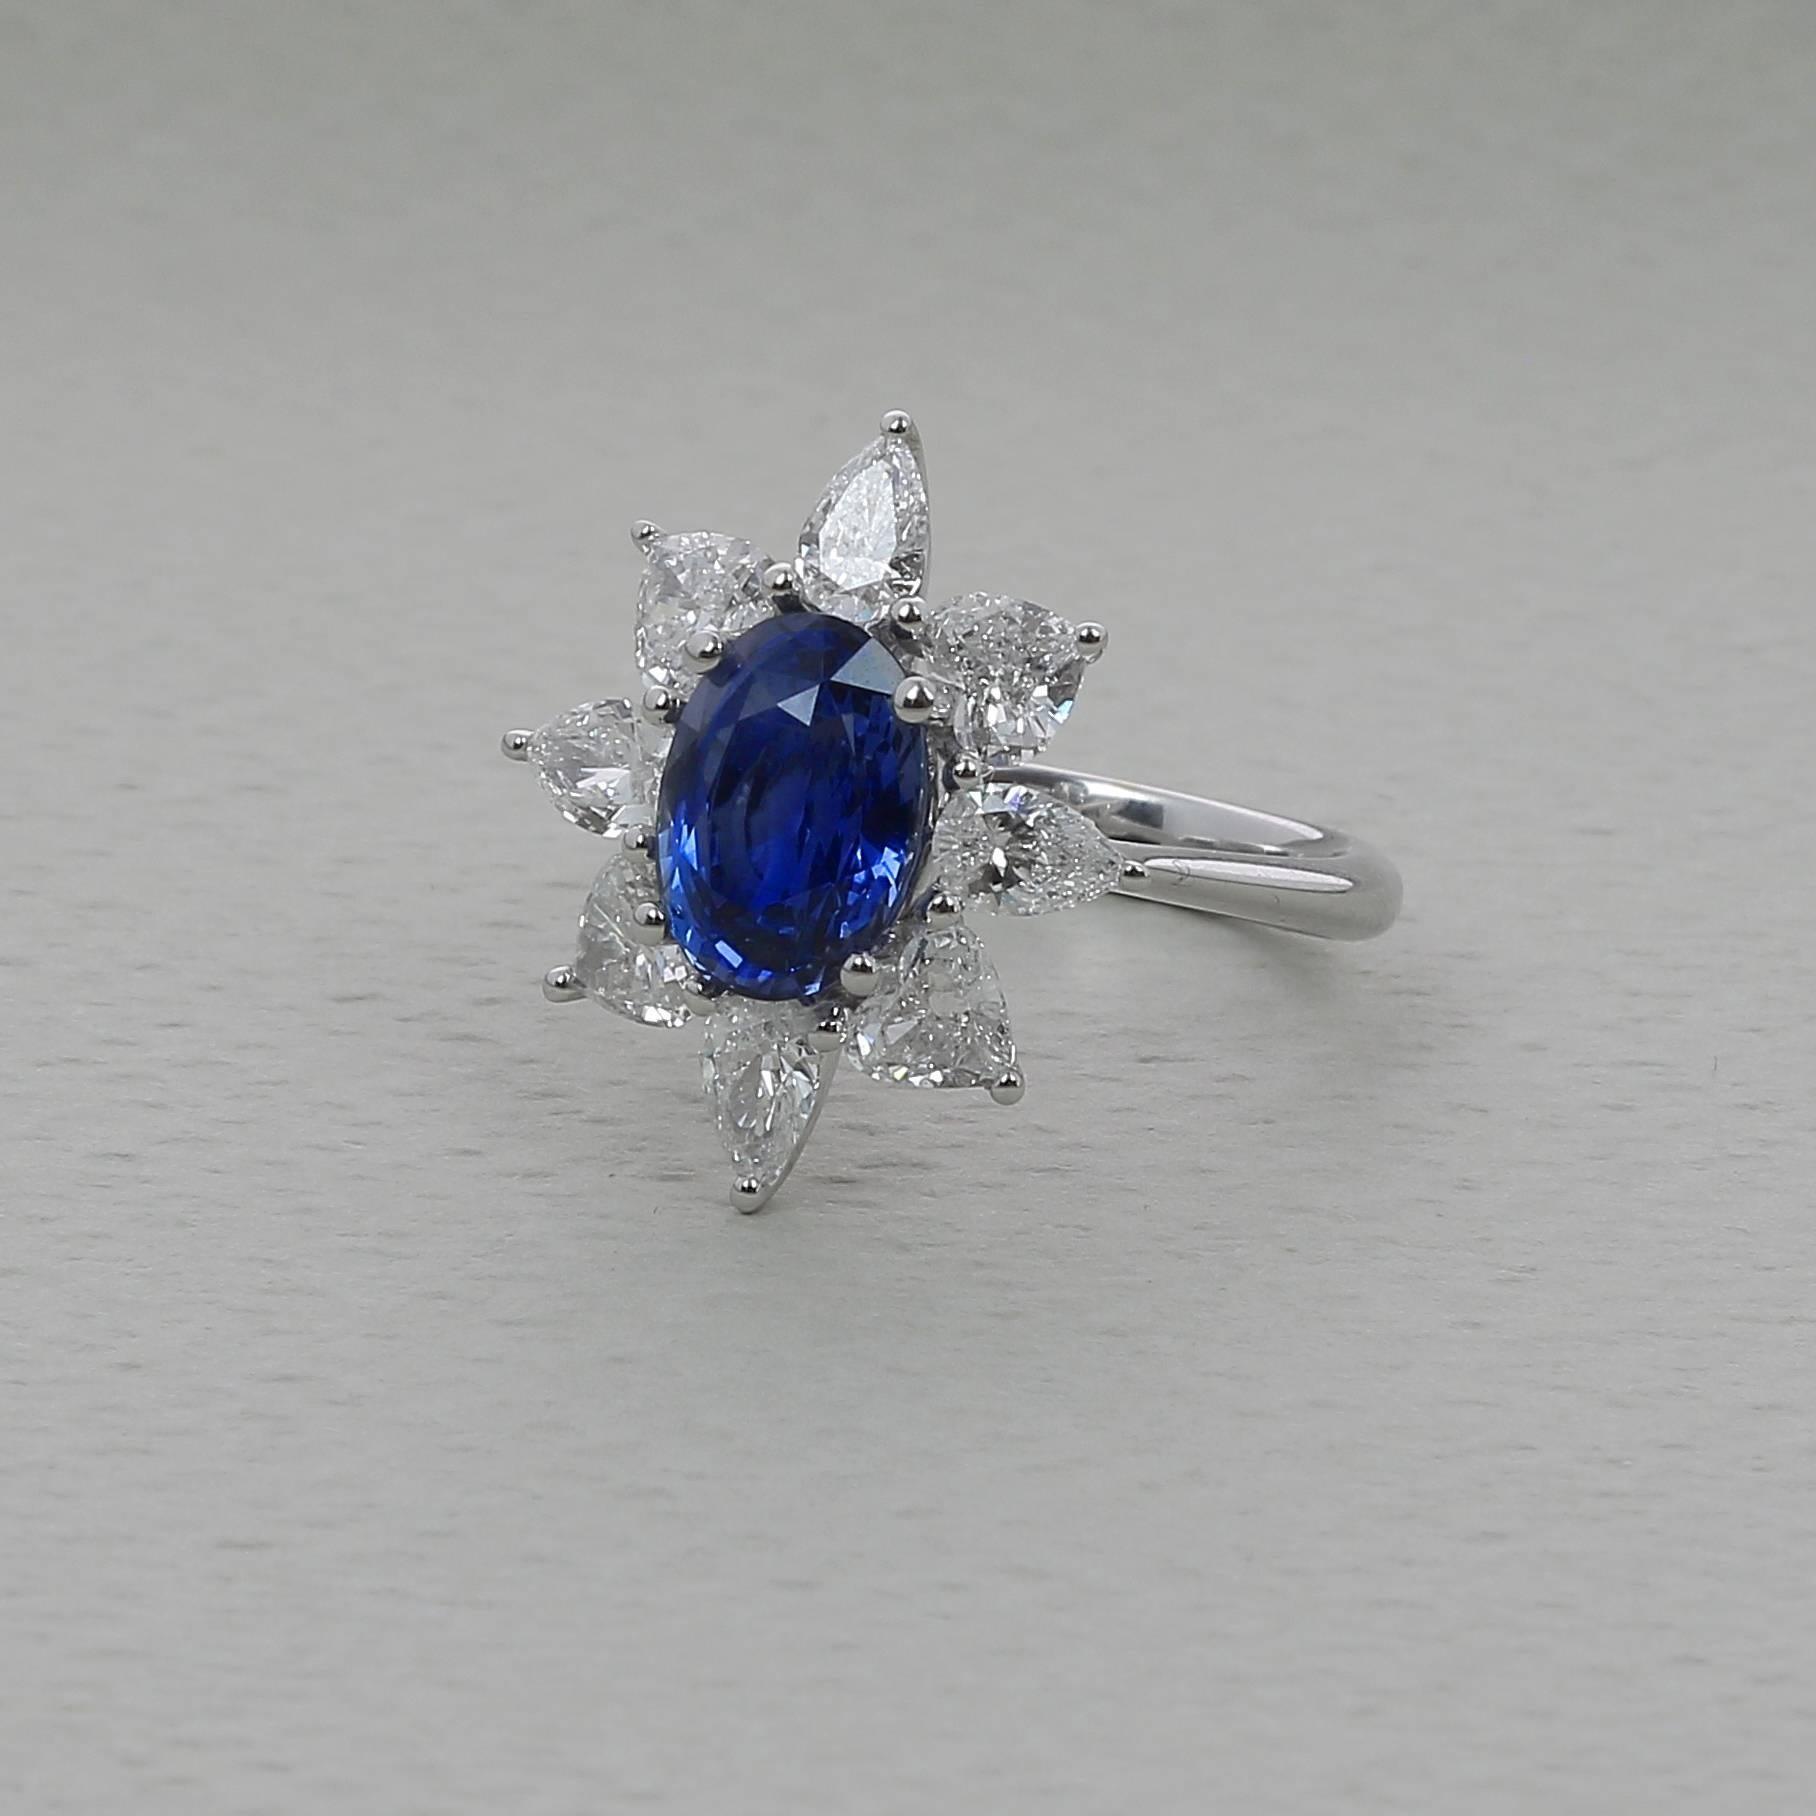 A Blue Sapphire Ring weighing 3.18 carats. The stone’s shape is oval, having for colors a Striking Blue. 
The ring is set with 4 Pear Diamonds weighing 0.83 Carats and 4 Heart Diamonds weighing 1.08 Carats.
The Sapphire comes with a GRS (Number